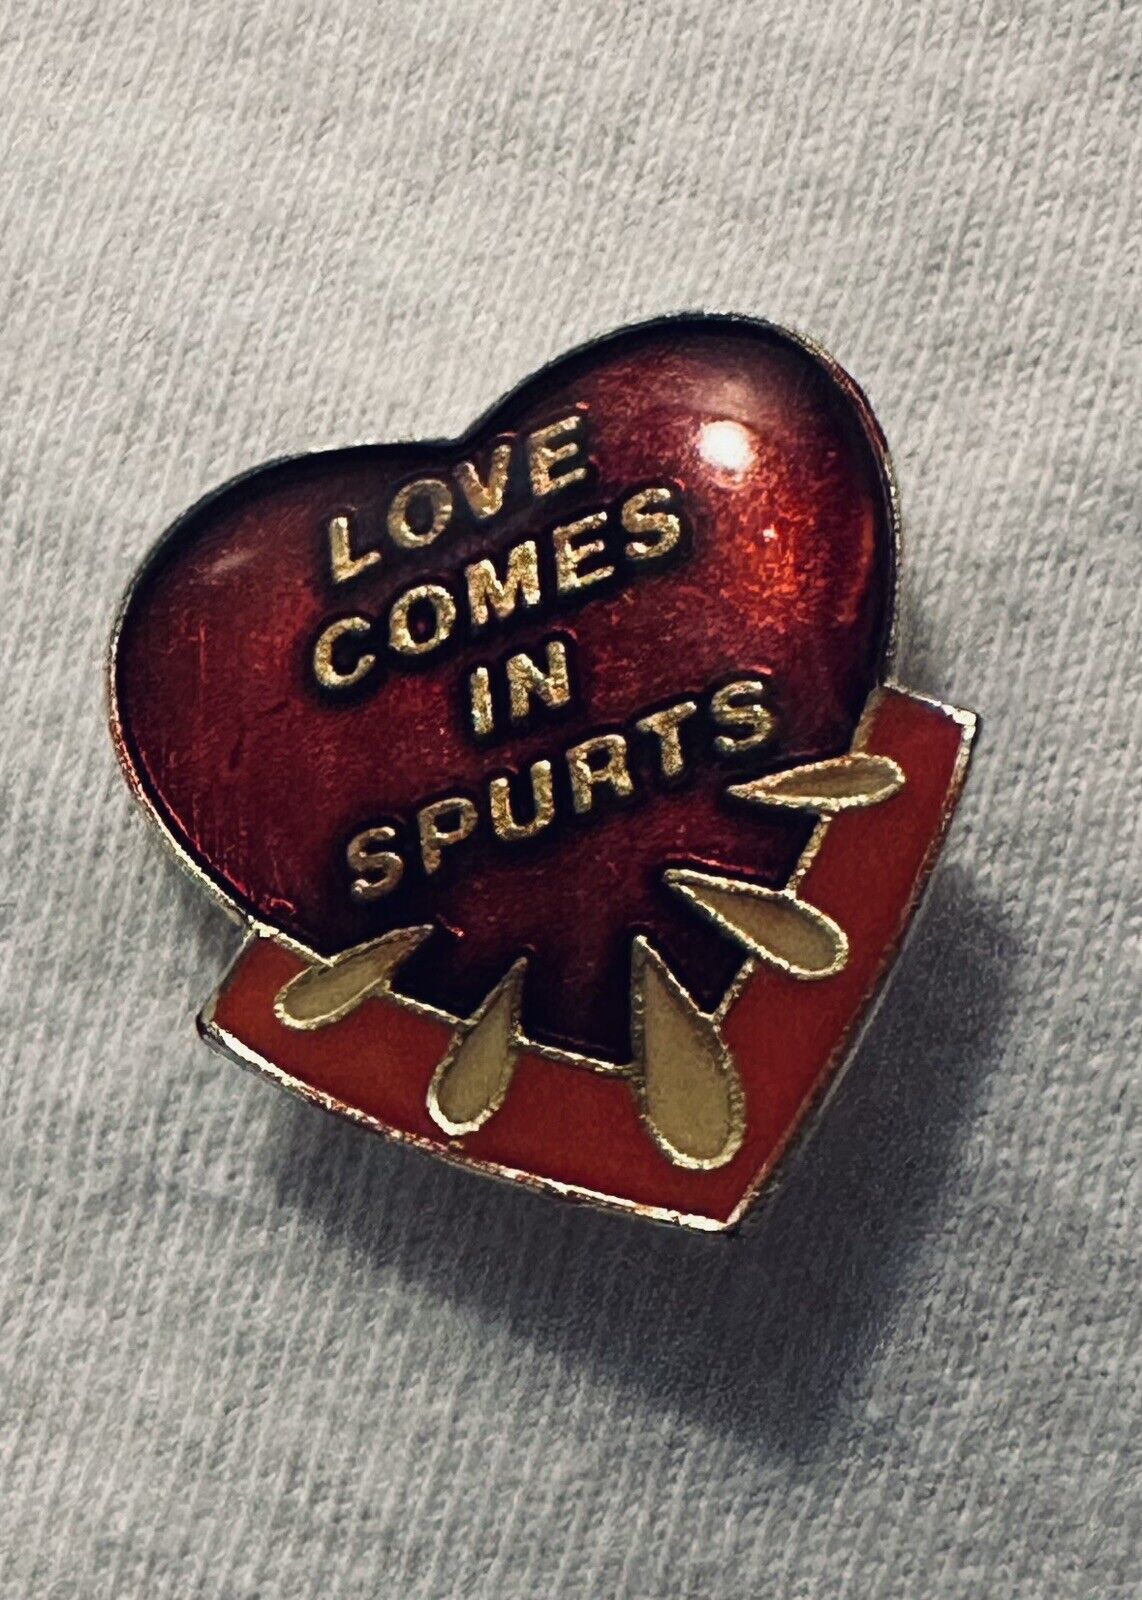 Vintage 1980s Enamel Risqué Novelty Pin “Love Comes in Spurts”